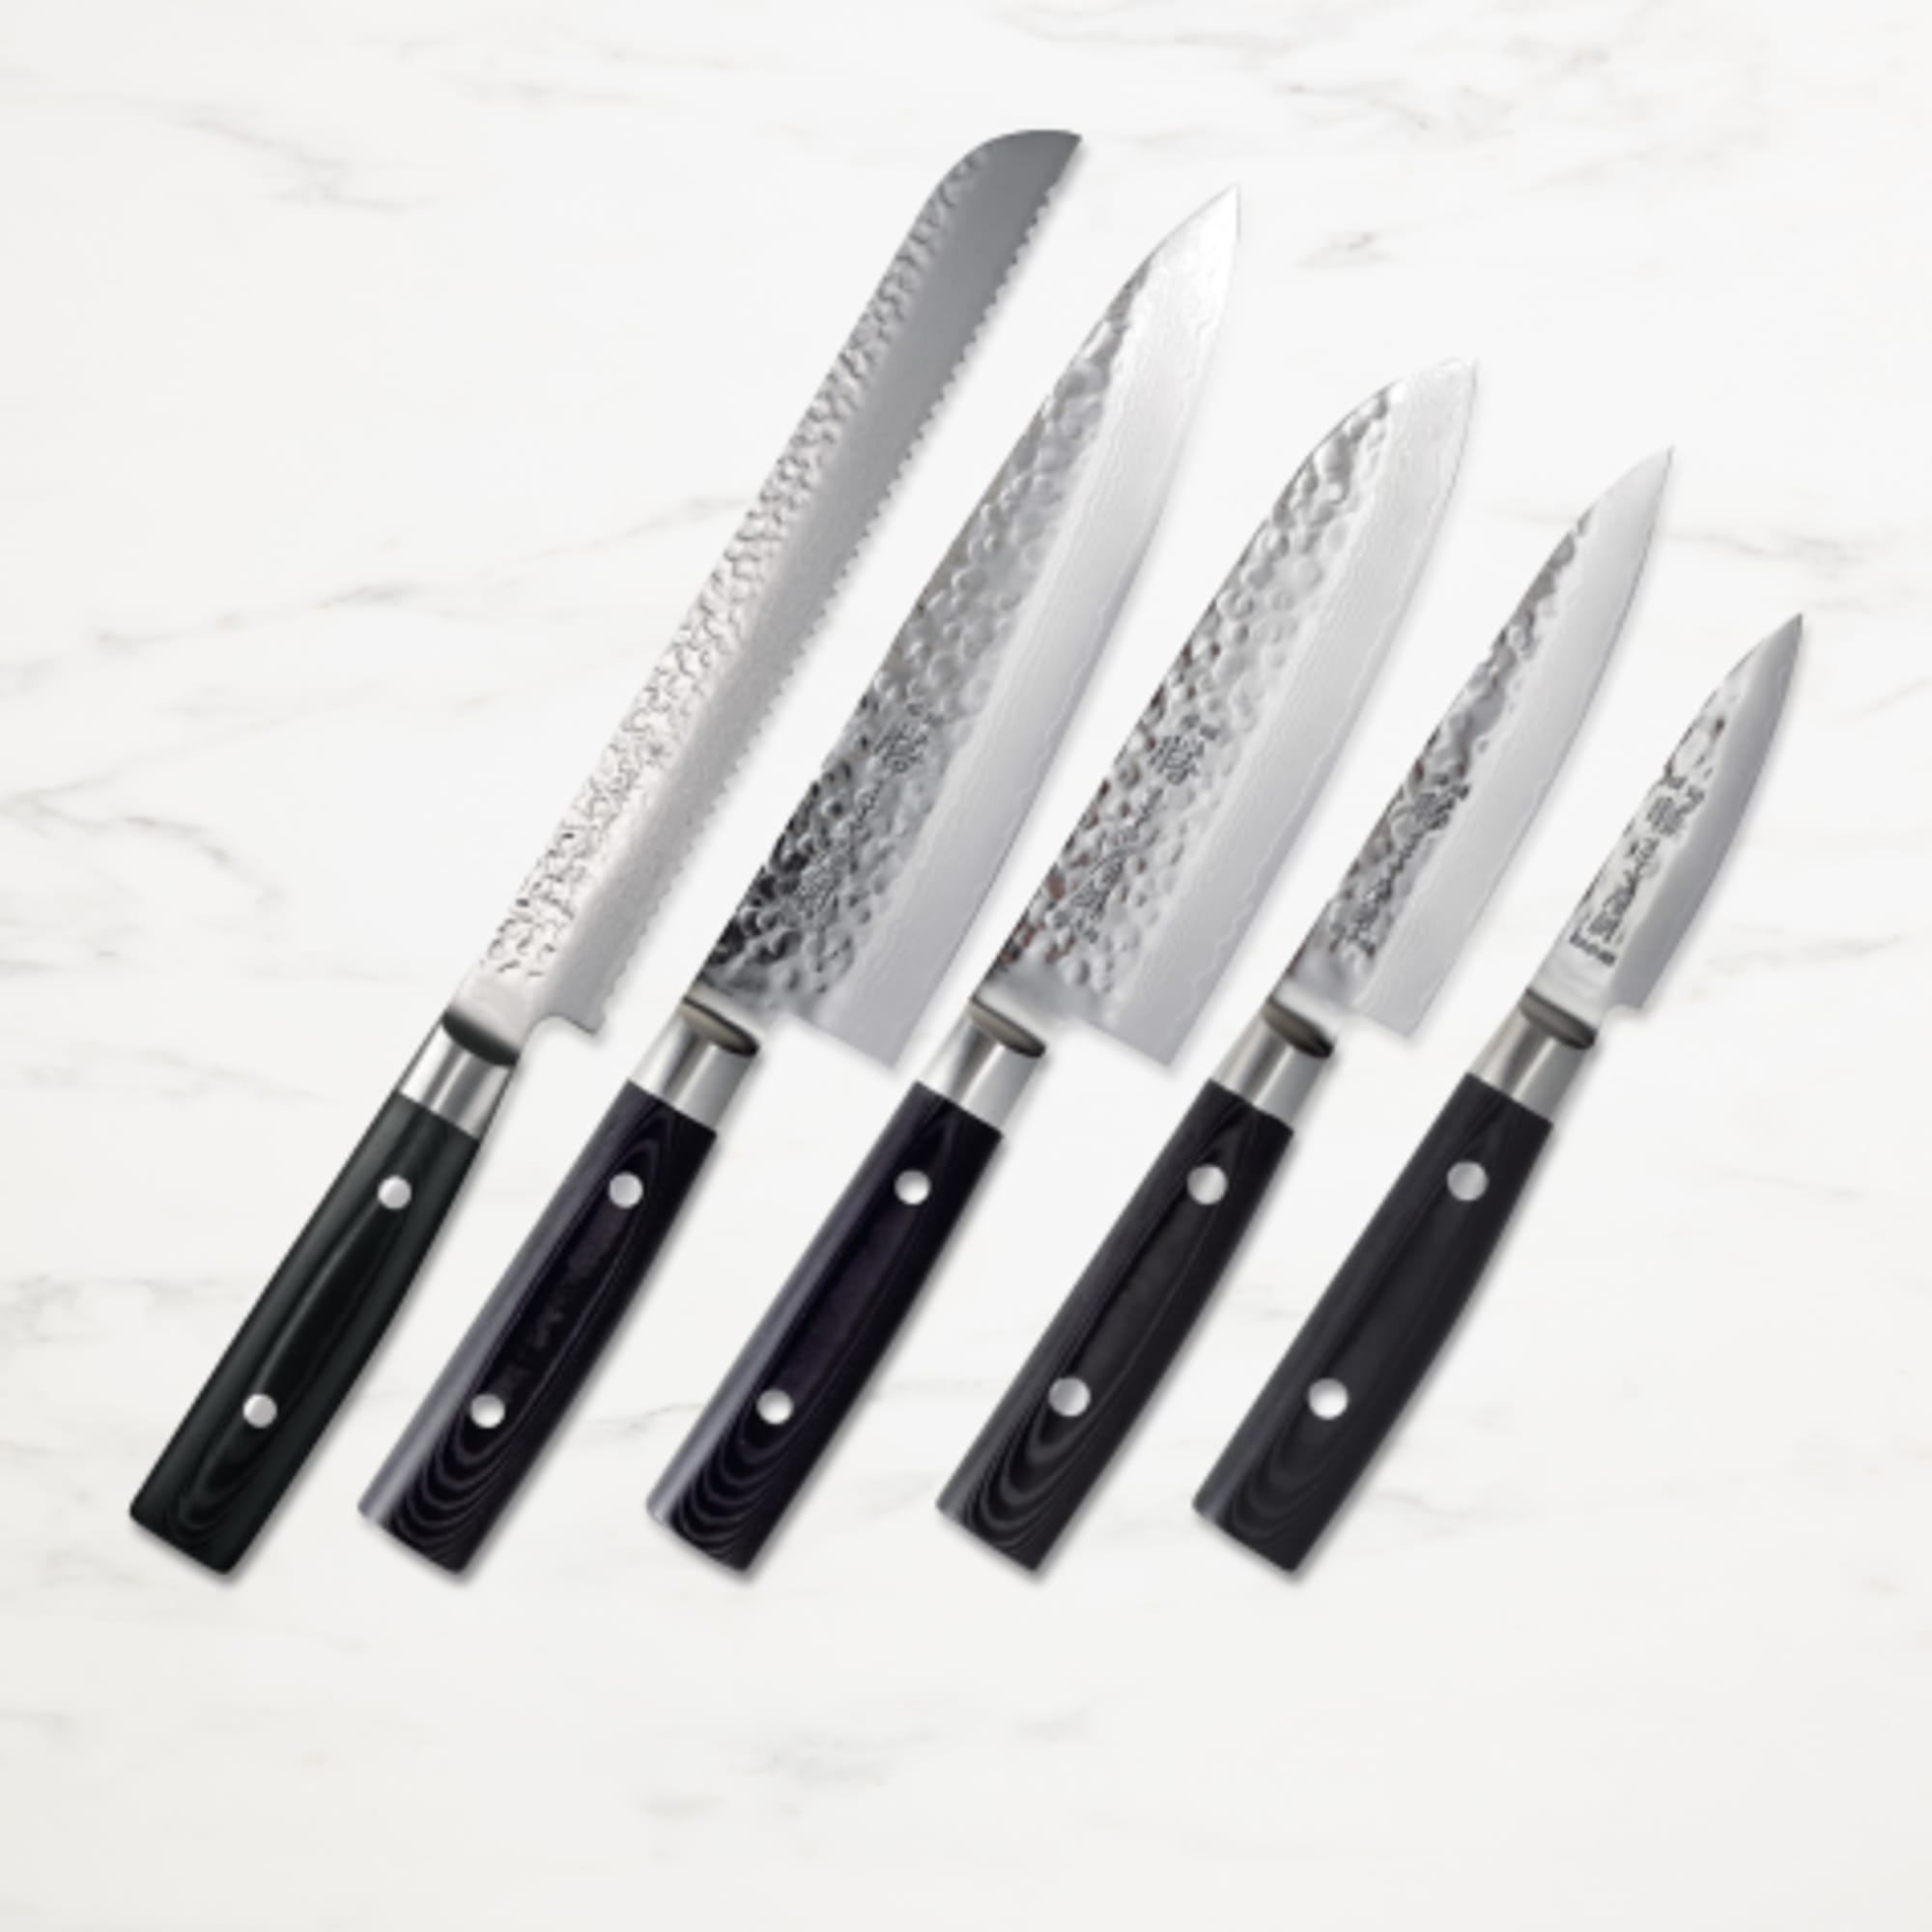 https://res.cloudinary.com/kitchenwarehouse/image/upload/c_fill,g_face,w_475/f_auto/t_PDP_2000x2000/Kitchen%20Warehouse%20Images%20/Yaxell-Zen-Premium-5pc-Knife-Set_1_2000.jpg?imagetype=pdp_thumbnail